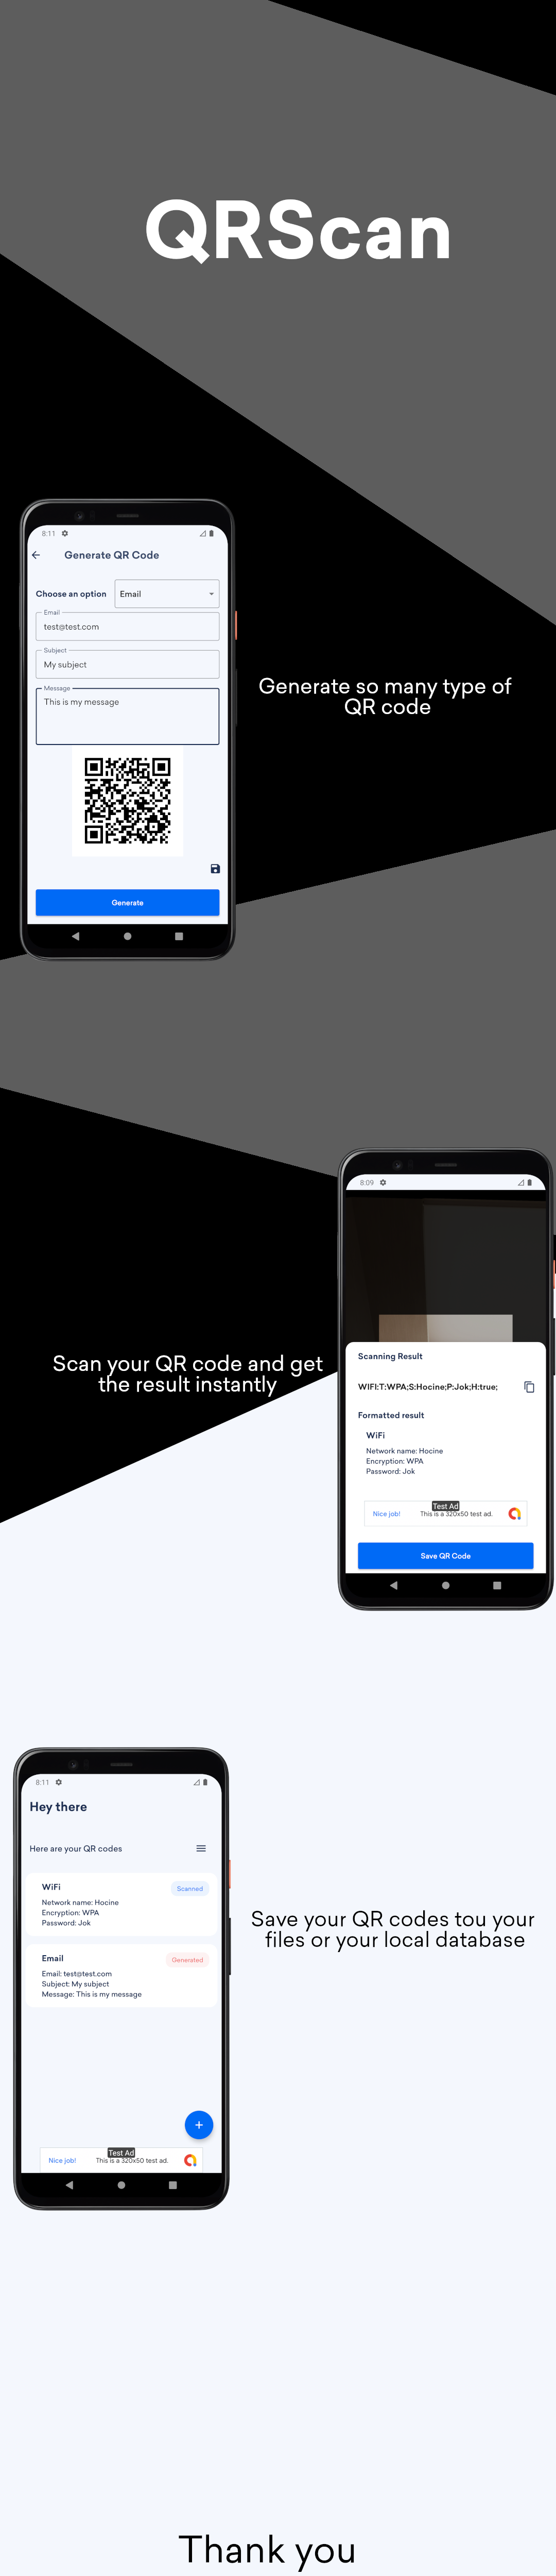 QRScan - Native QR codes and barcodes scanner and generator Android app - 1